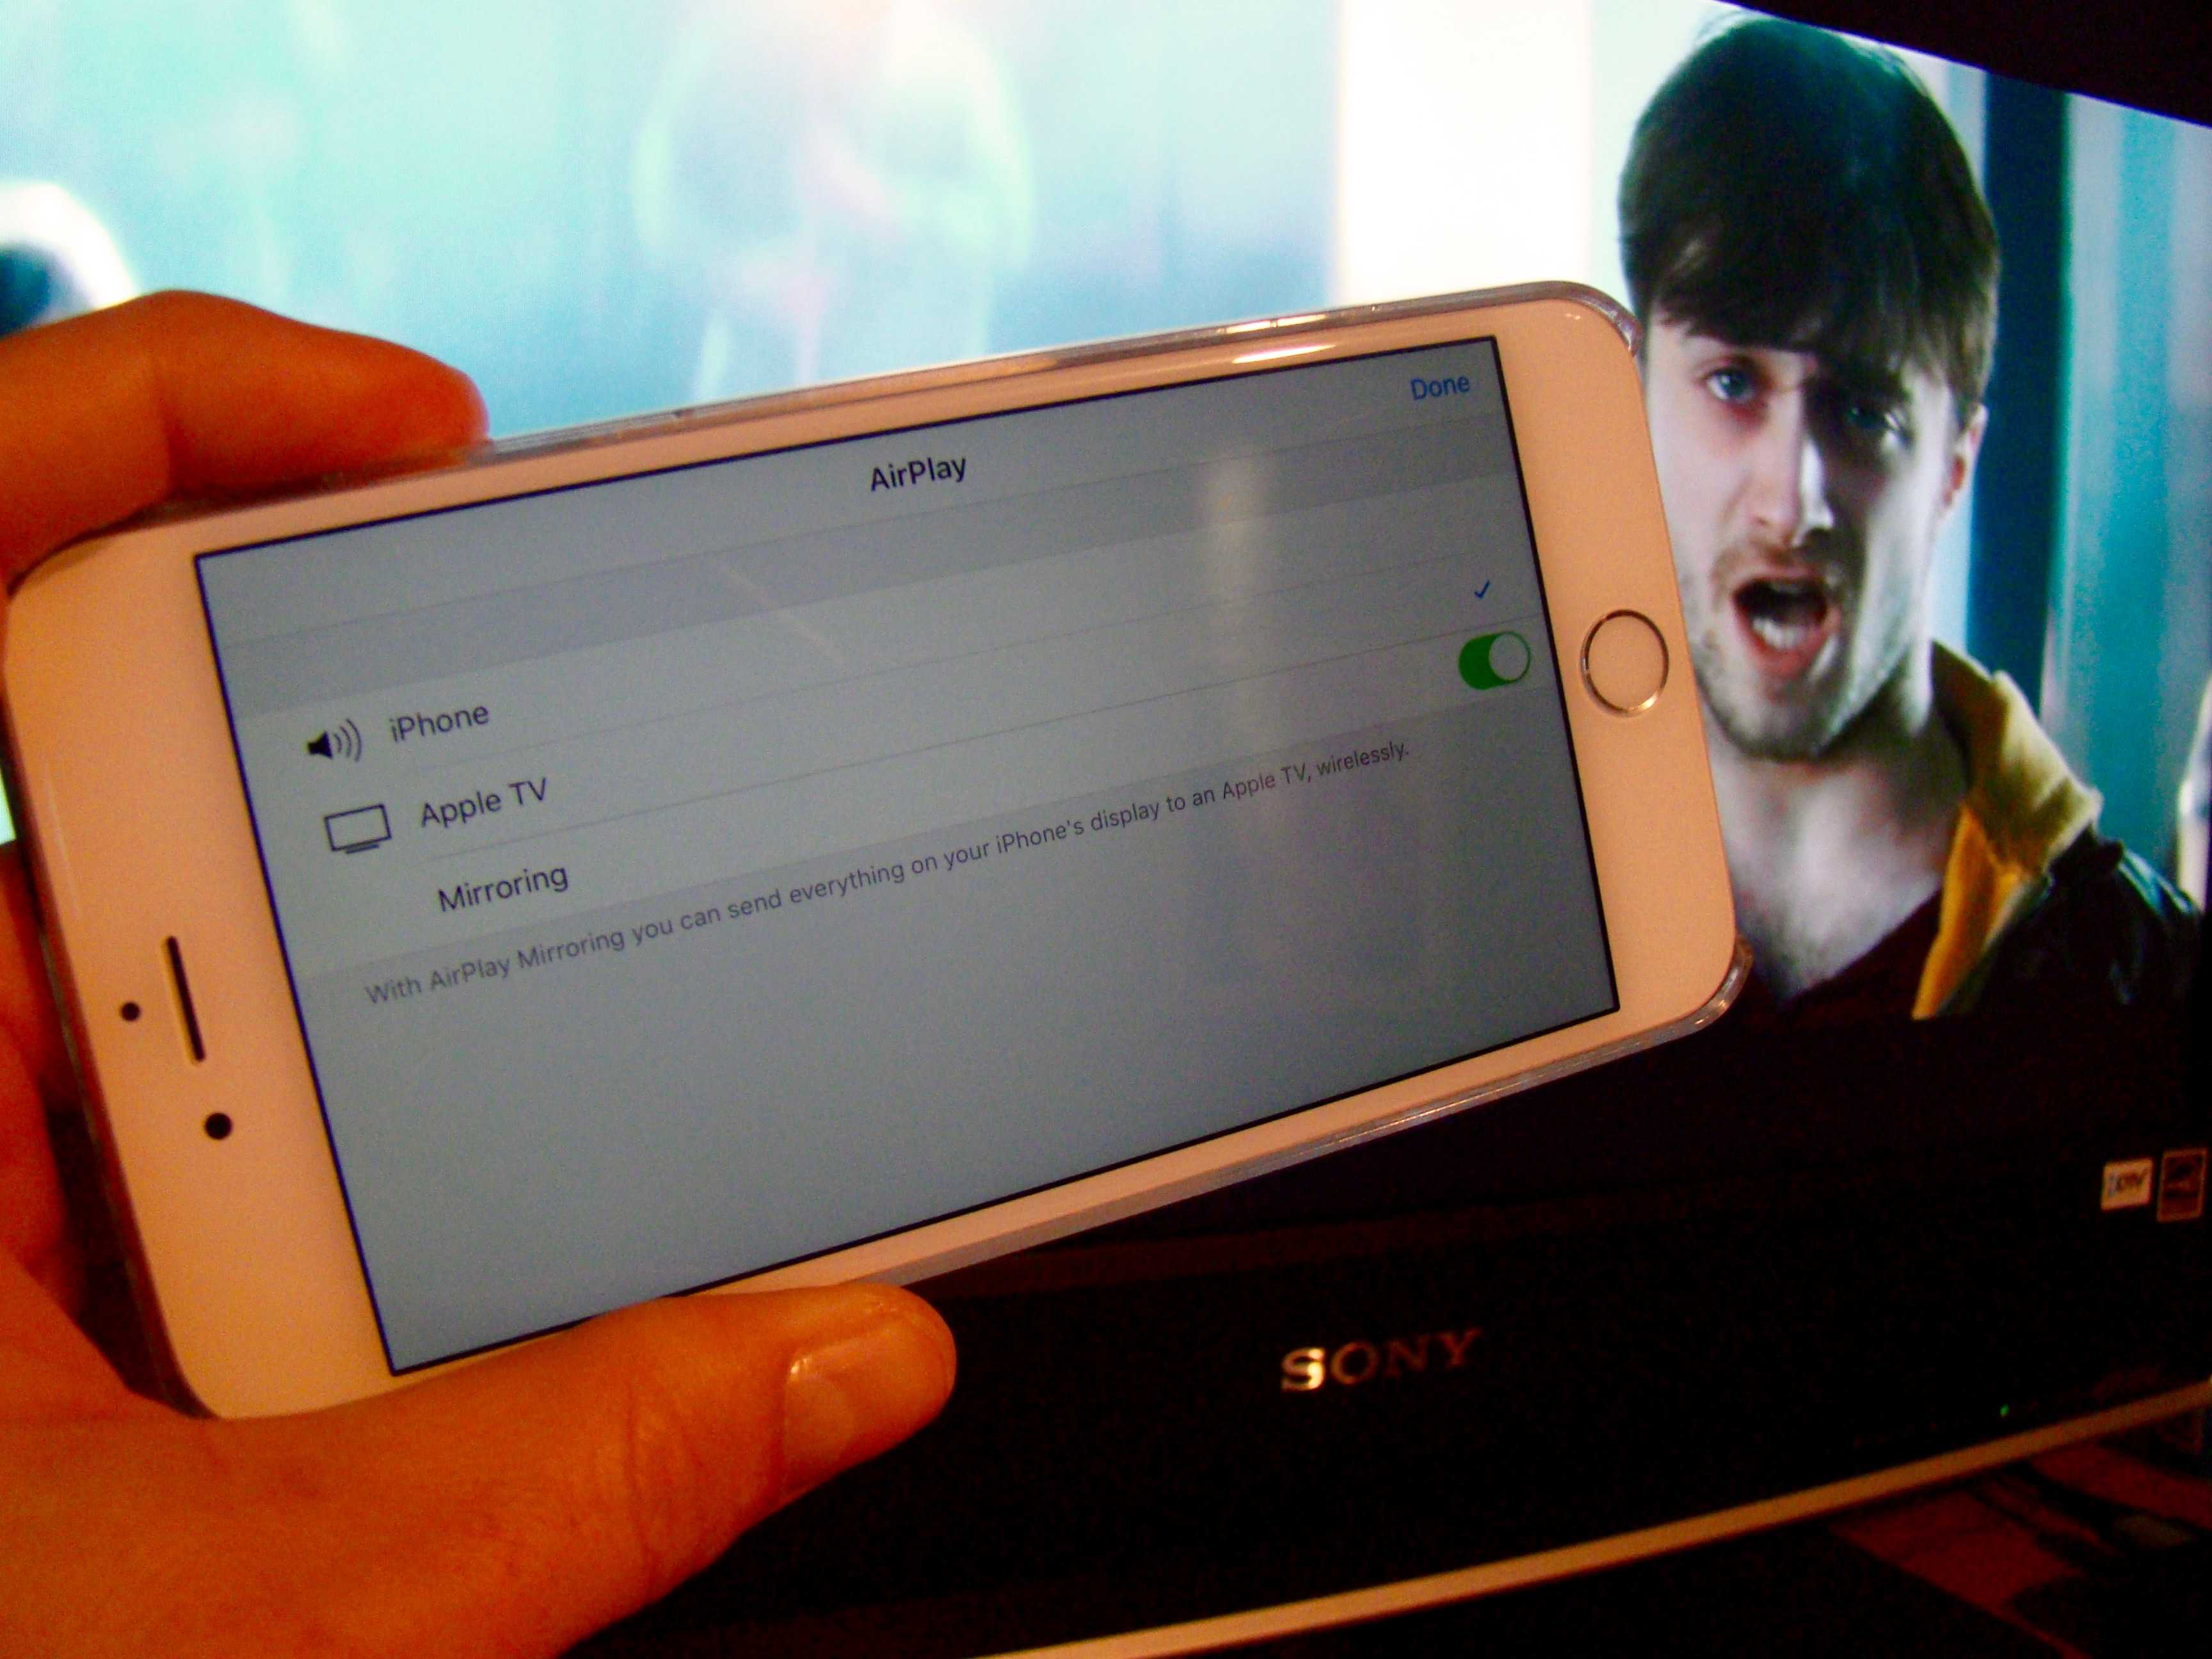 Daniel Radcliffe in Horns from iPhone to TV.